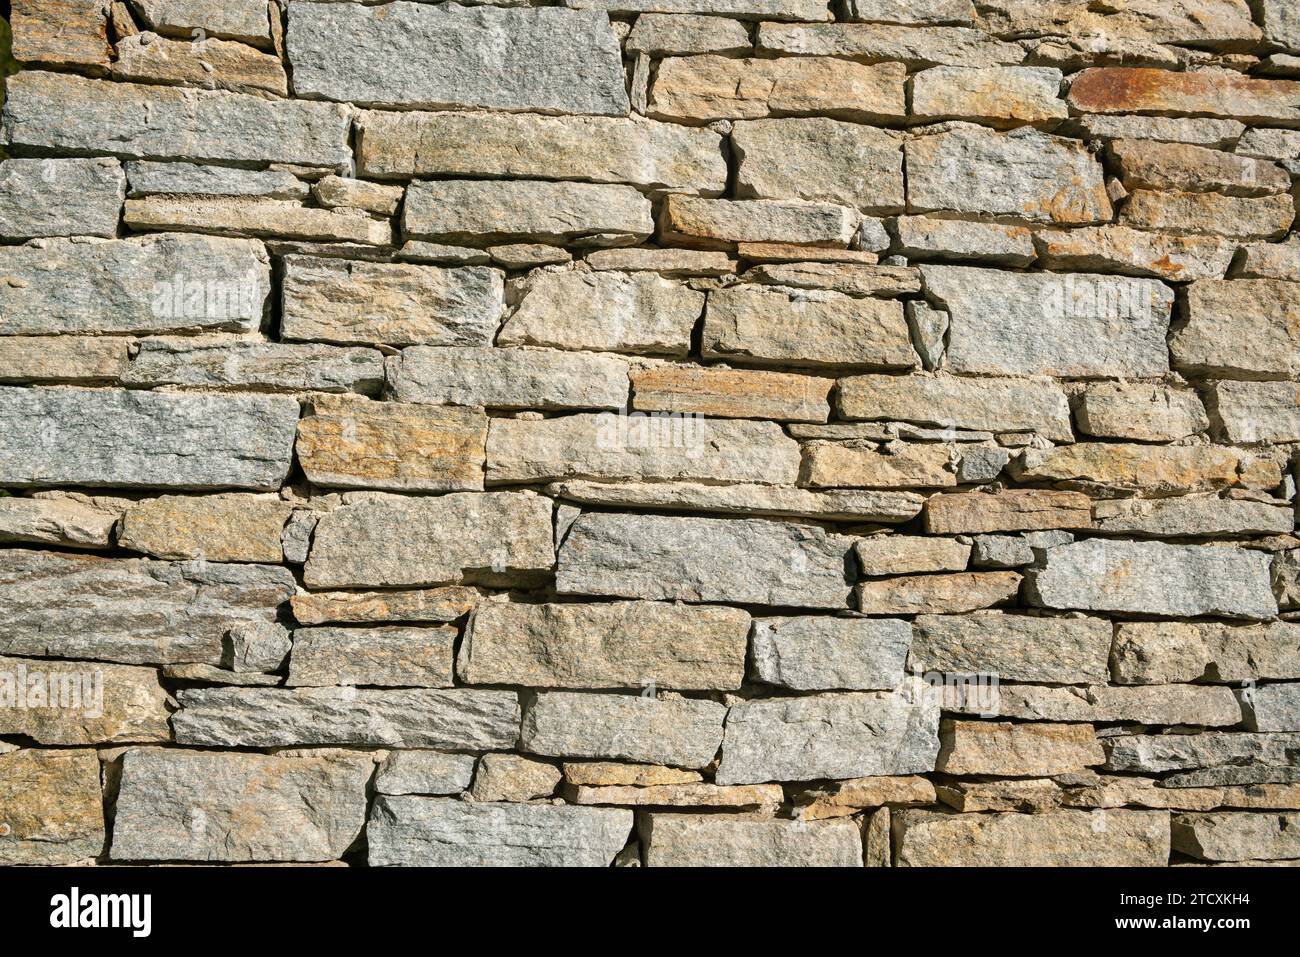 texture of a stone wall with rugged and wrinkled surface, characterized by a variety of earthy tones and intriguing details. log cabin, house. Stock Photo